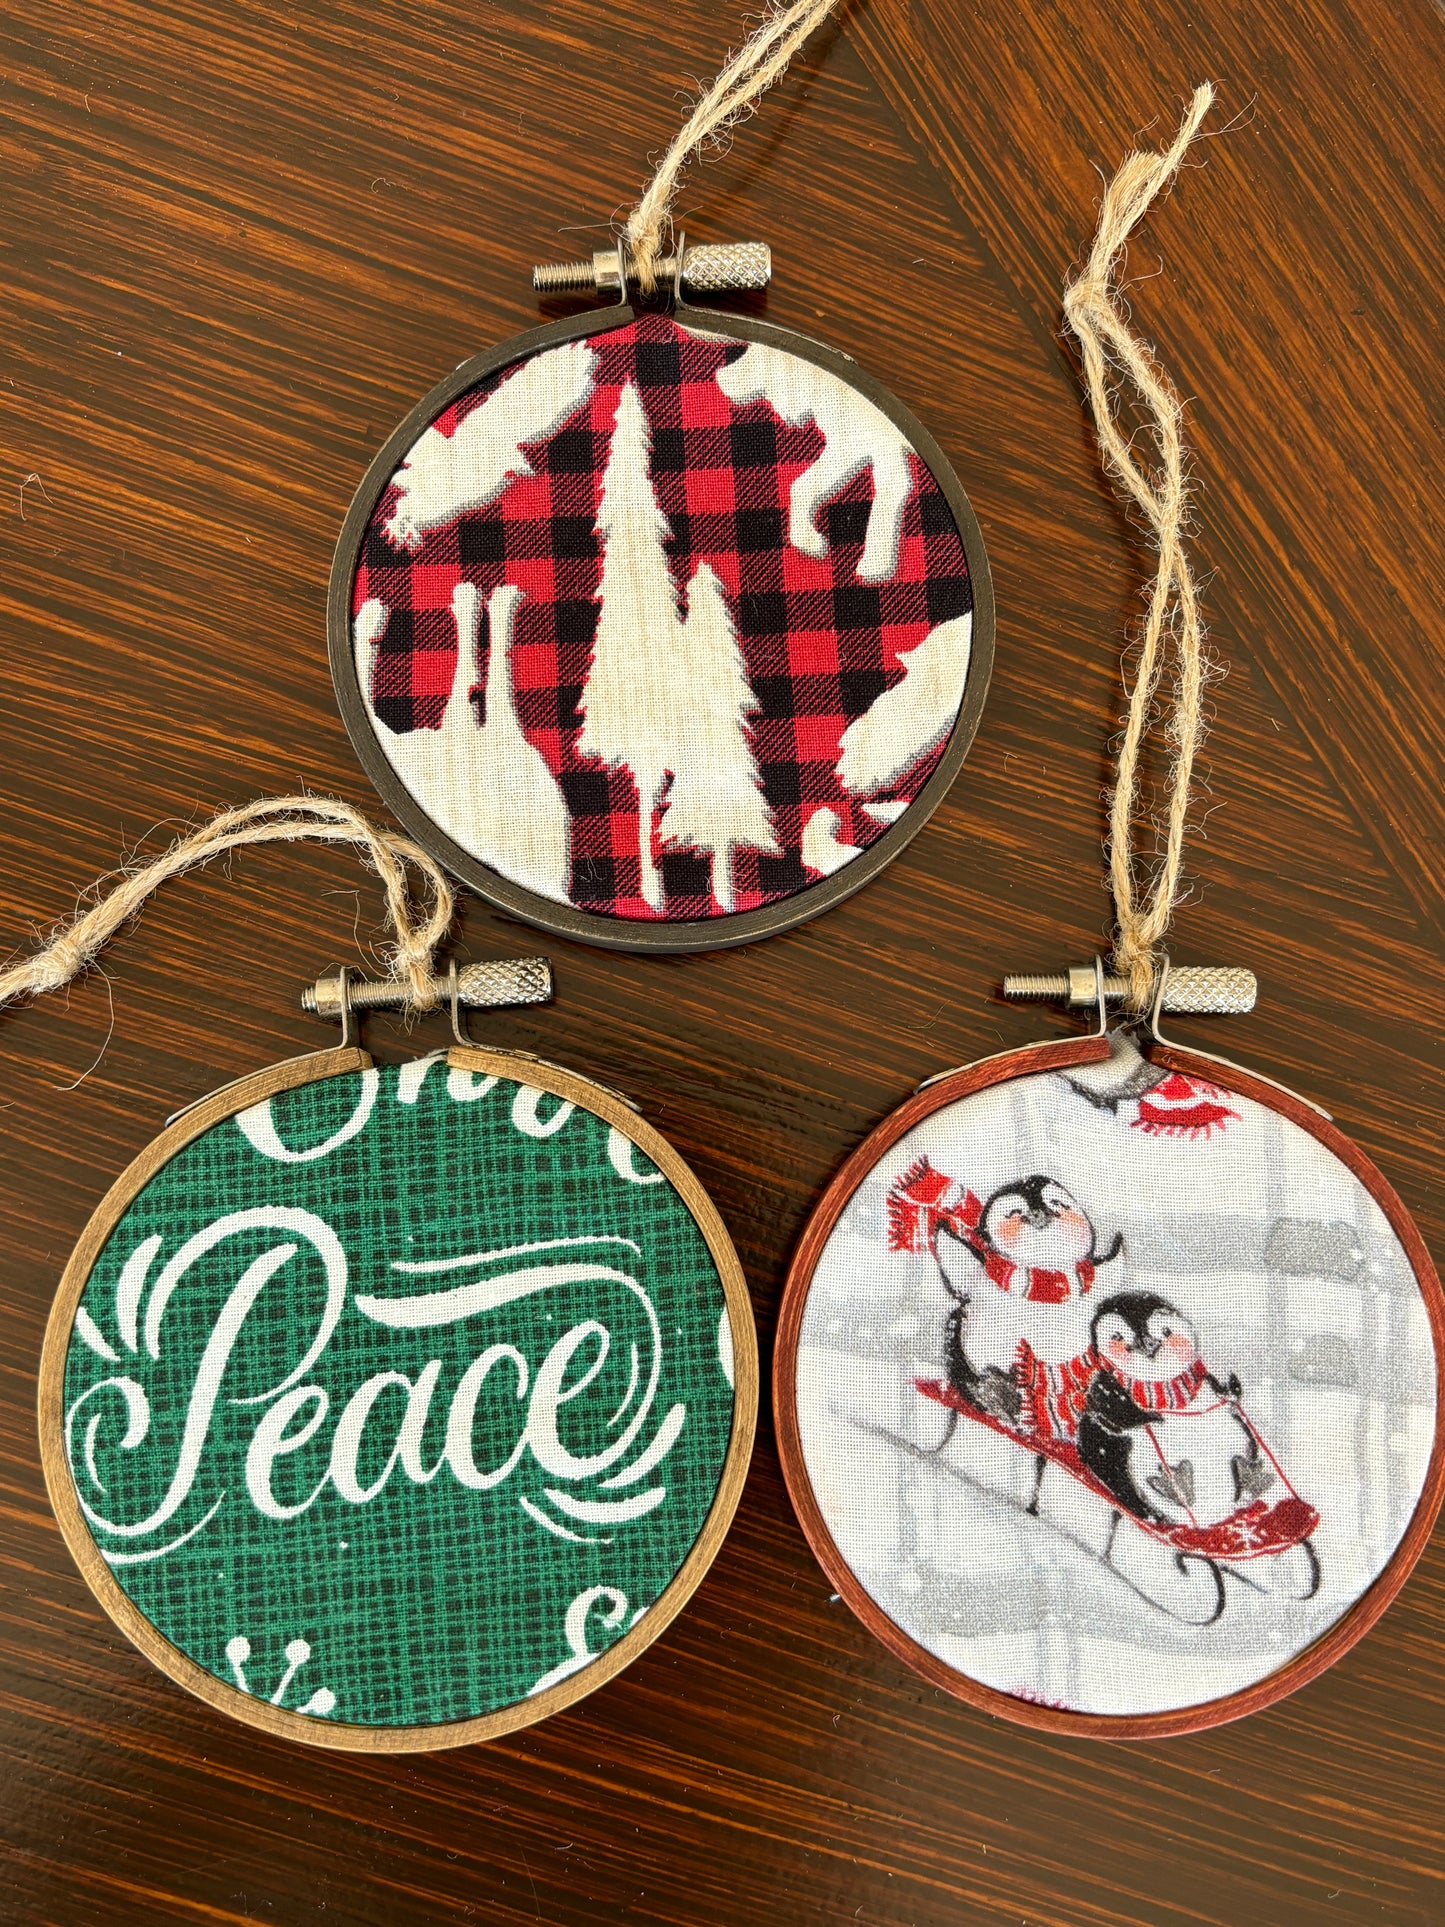 Set of 3 Rustic Fabric and Wood Handmade Christmas Ornaments, Peace-Trees-Penguins